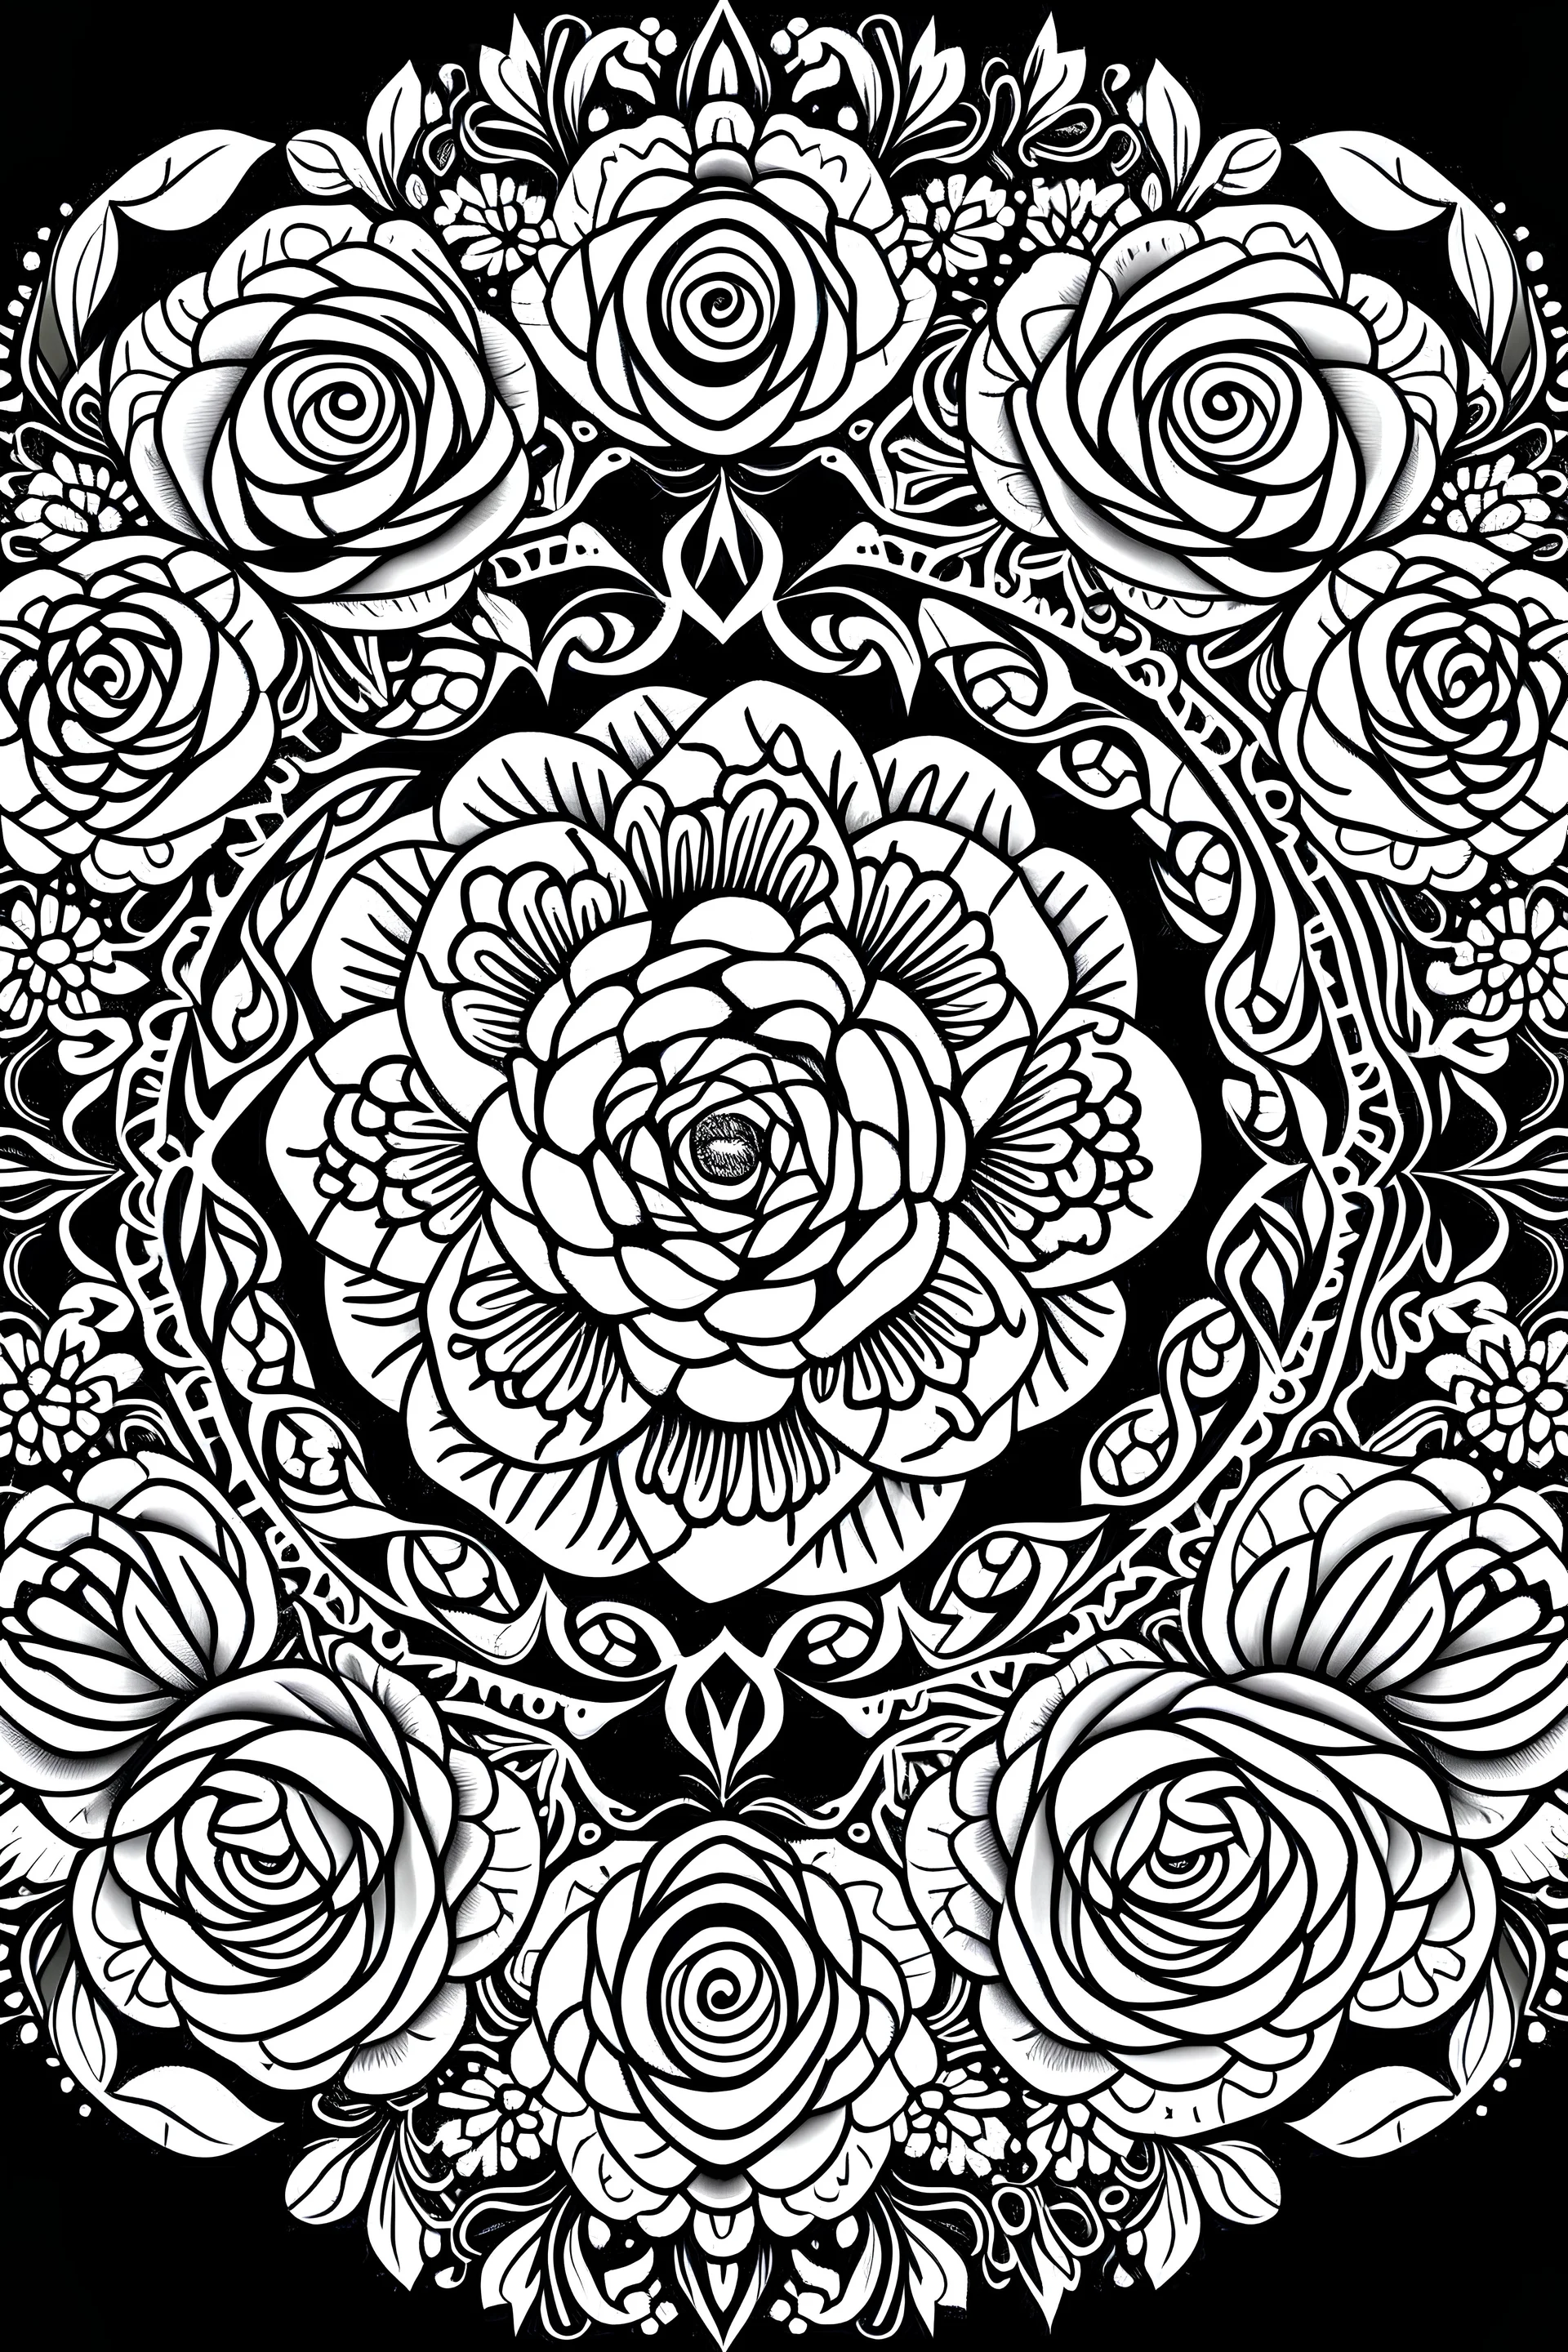 Create a black and white image of roses and tulips with a white mandala design covering the entire background. This image is intended to be colored in by an adult, so use the colors black and white accordingly